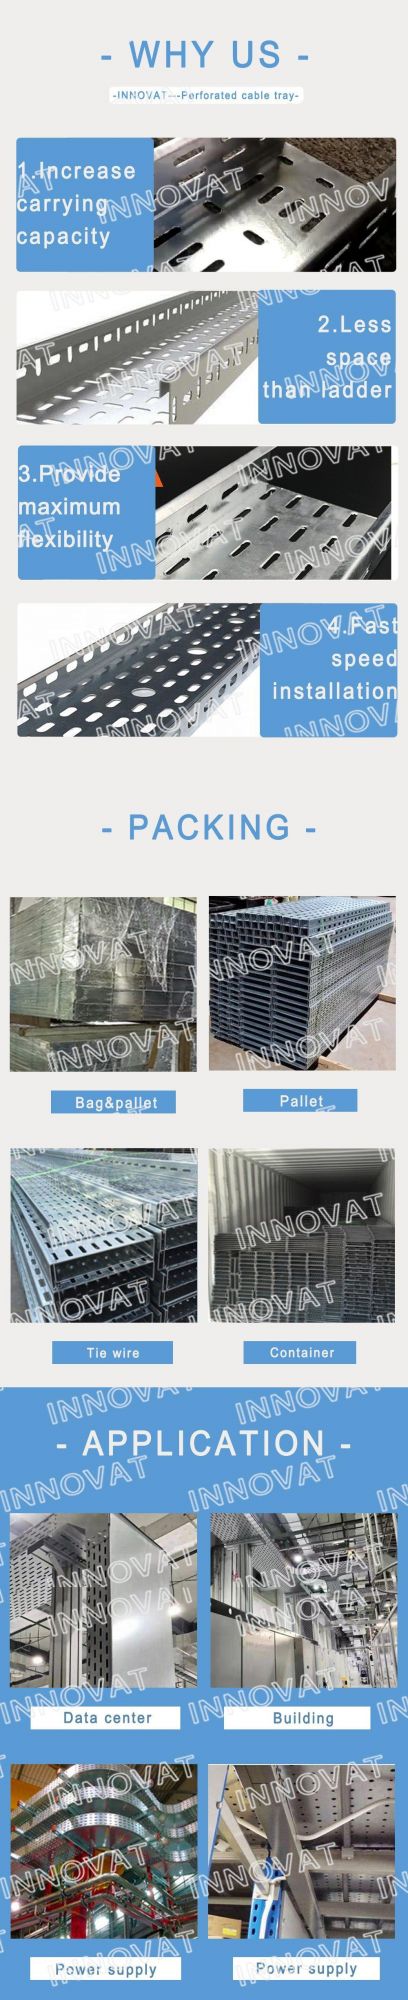 for Cable Perforated Cable Tray Customized Galvanized Steel Perforated Cable Tray Punched Indoor Used